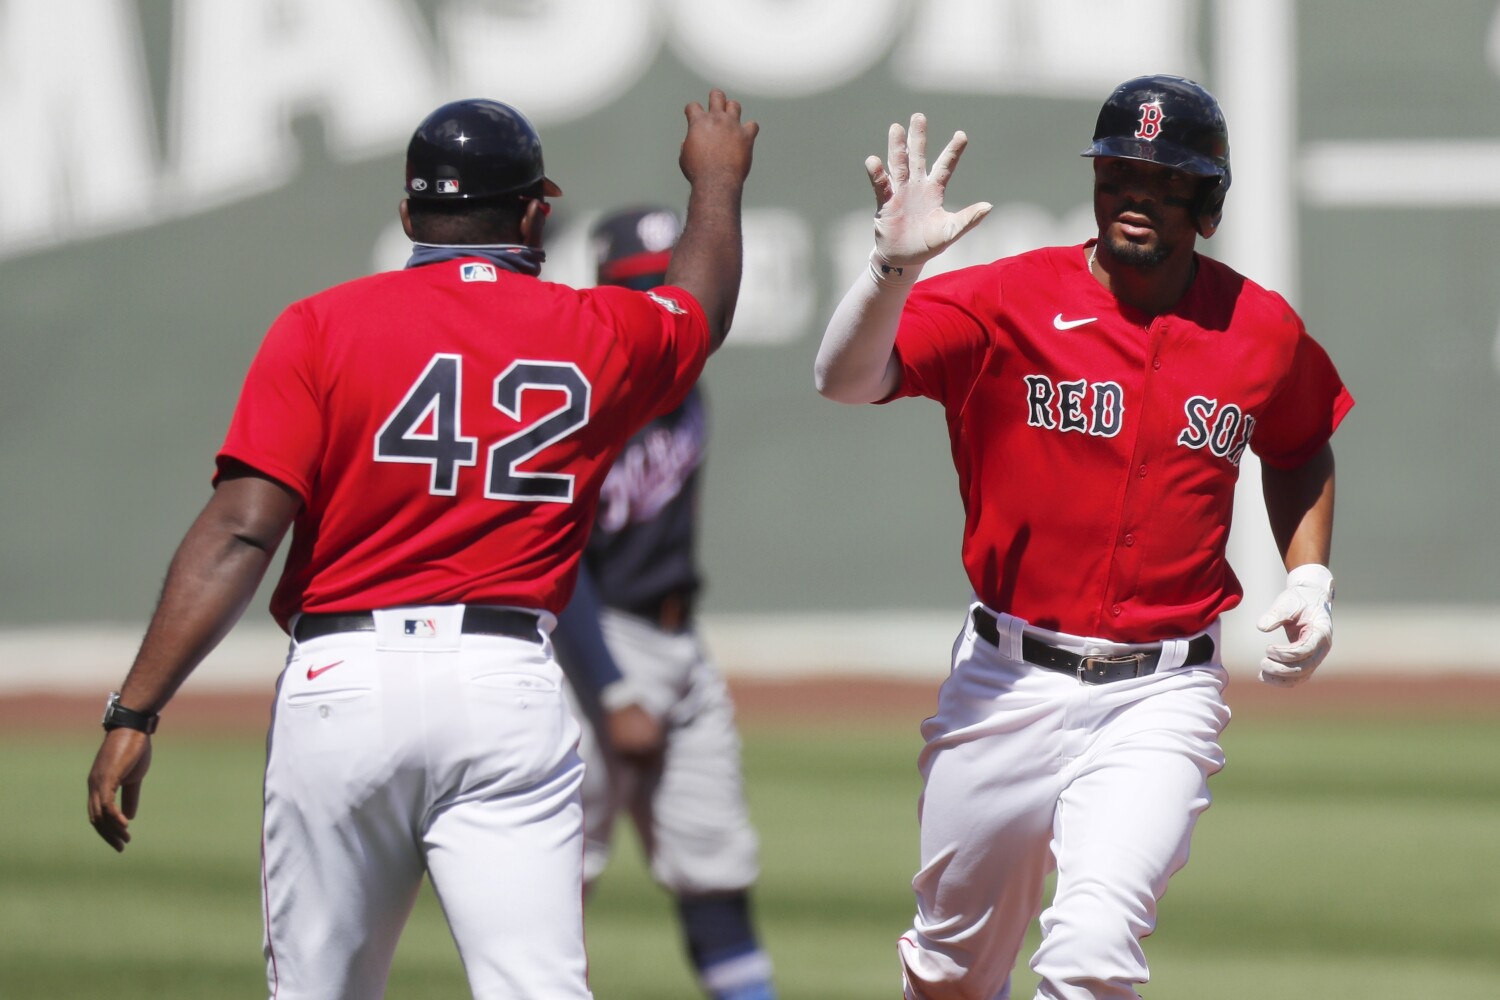 Martinez, Dalbec homers power Red Sox past Mariners in Seattle